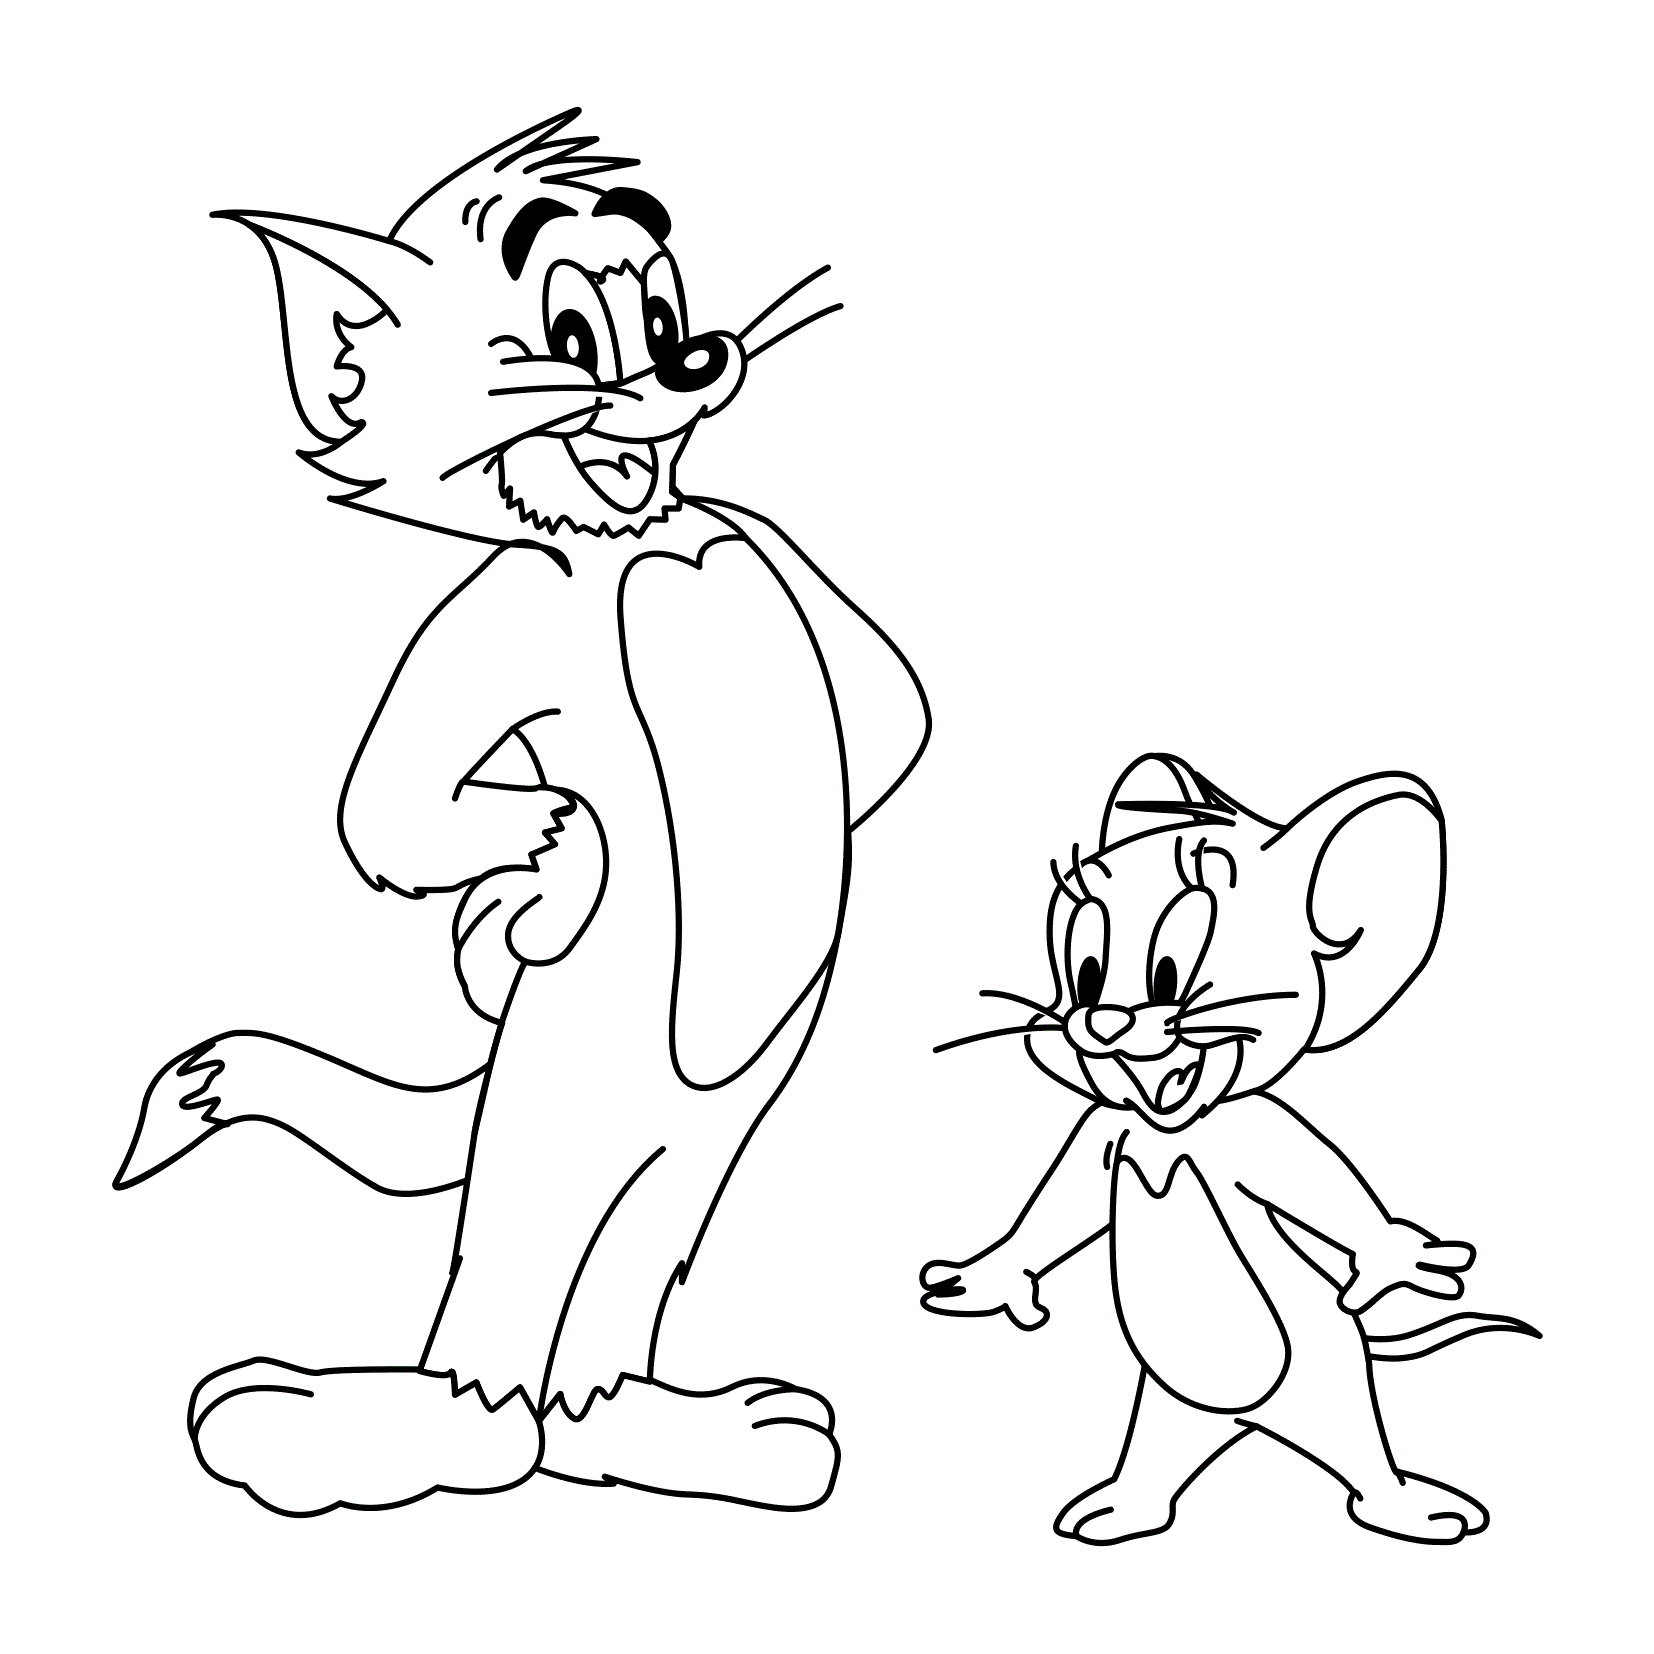 Tom and Jerry Coloring Pages TV Film Tom and Jerry Image Printable 2020 10232 Coloring4free